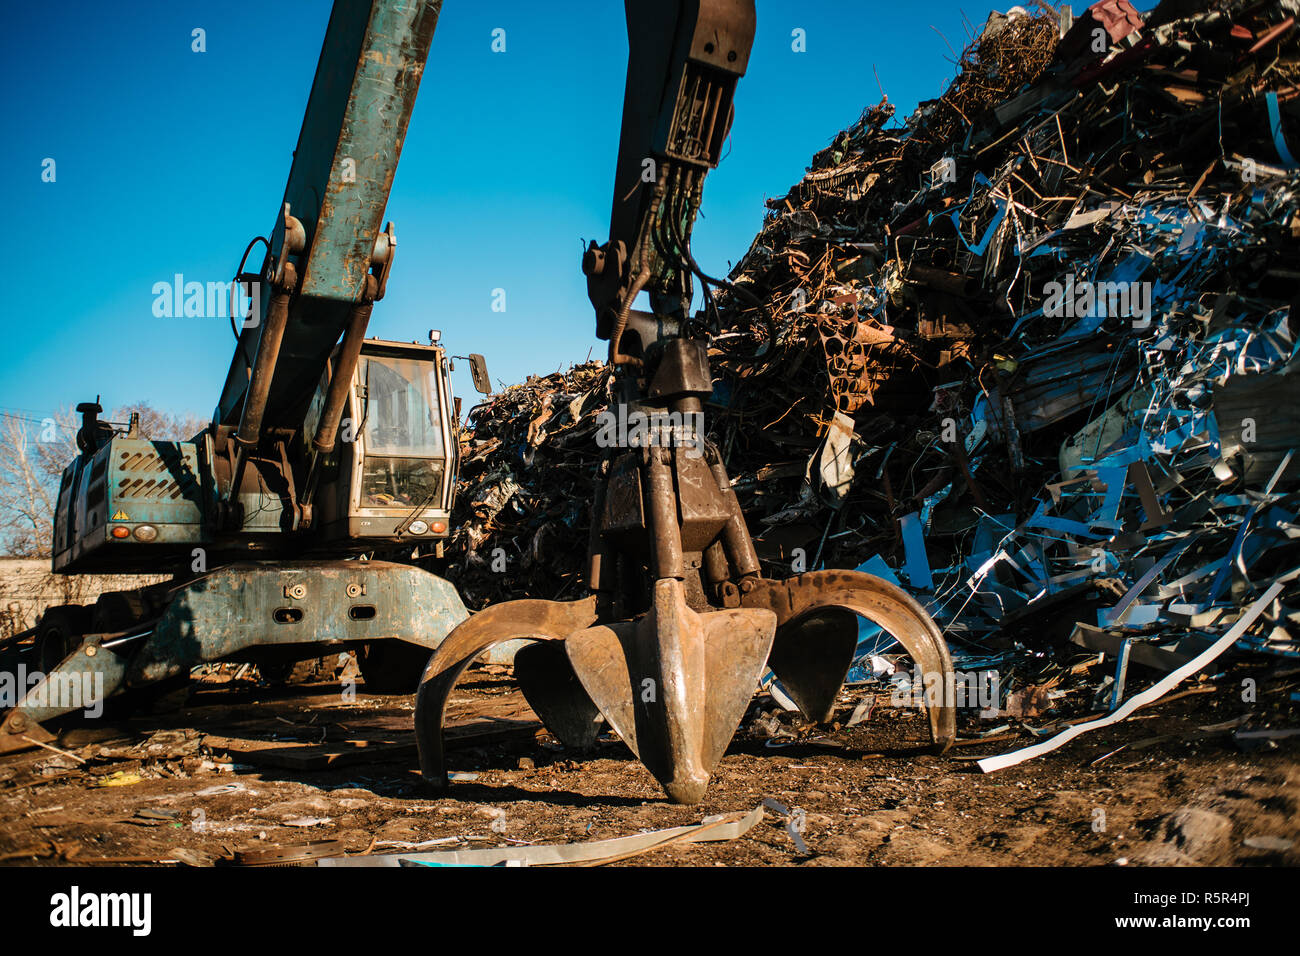 Recycling station. Metal dump with working crane and deep blue sky Stock Photo